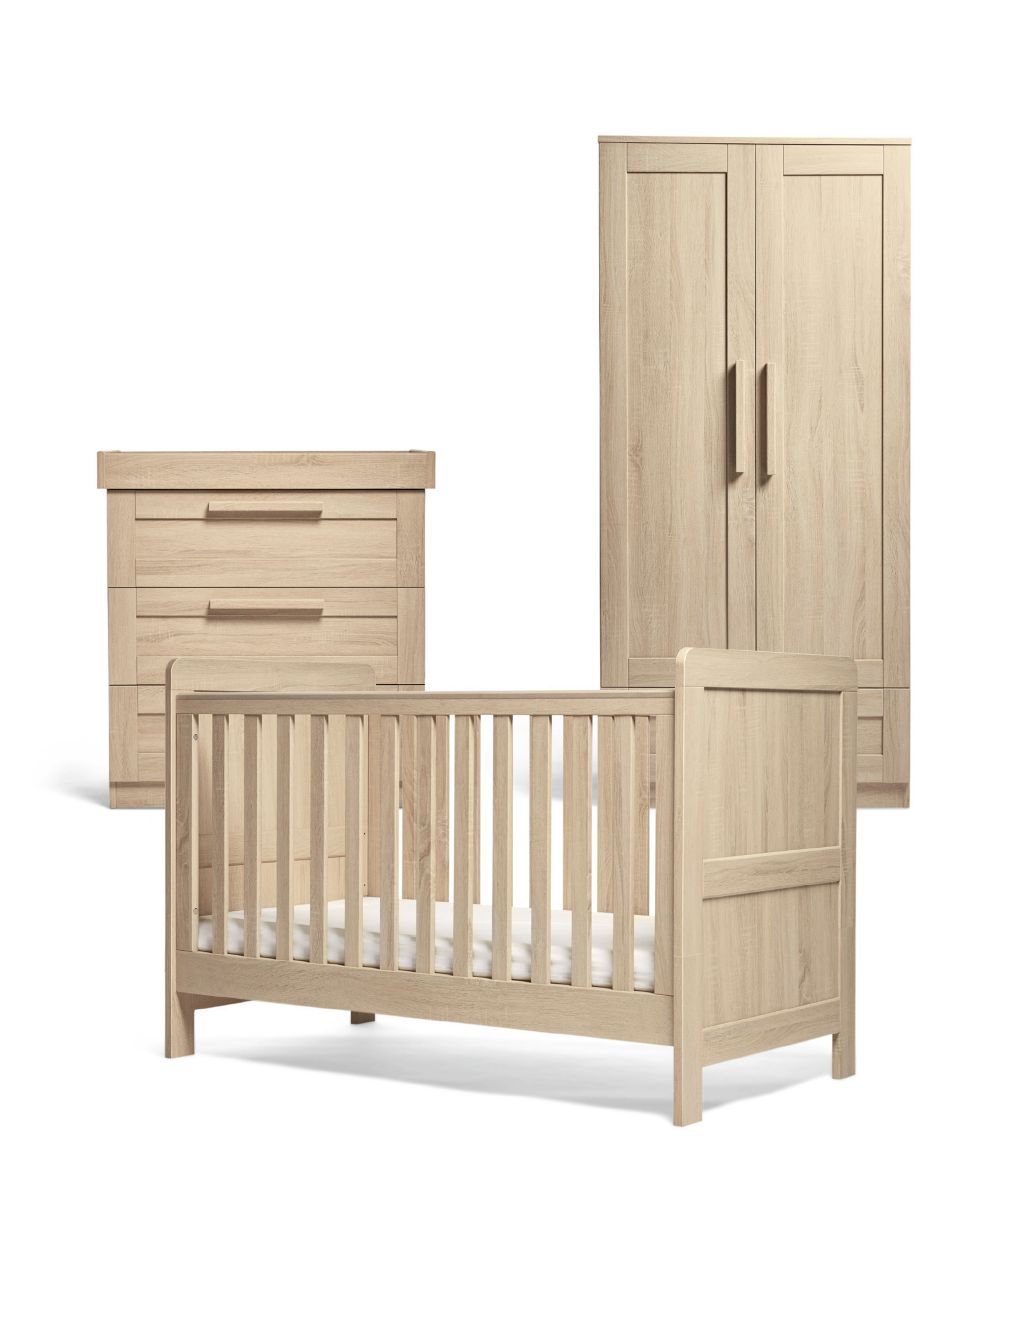 Atlas 3 Piece Cotbed Range with Dresser and Wardrobe